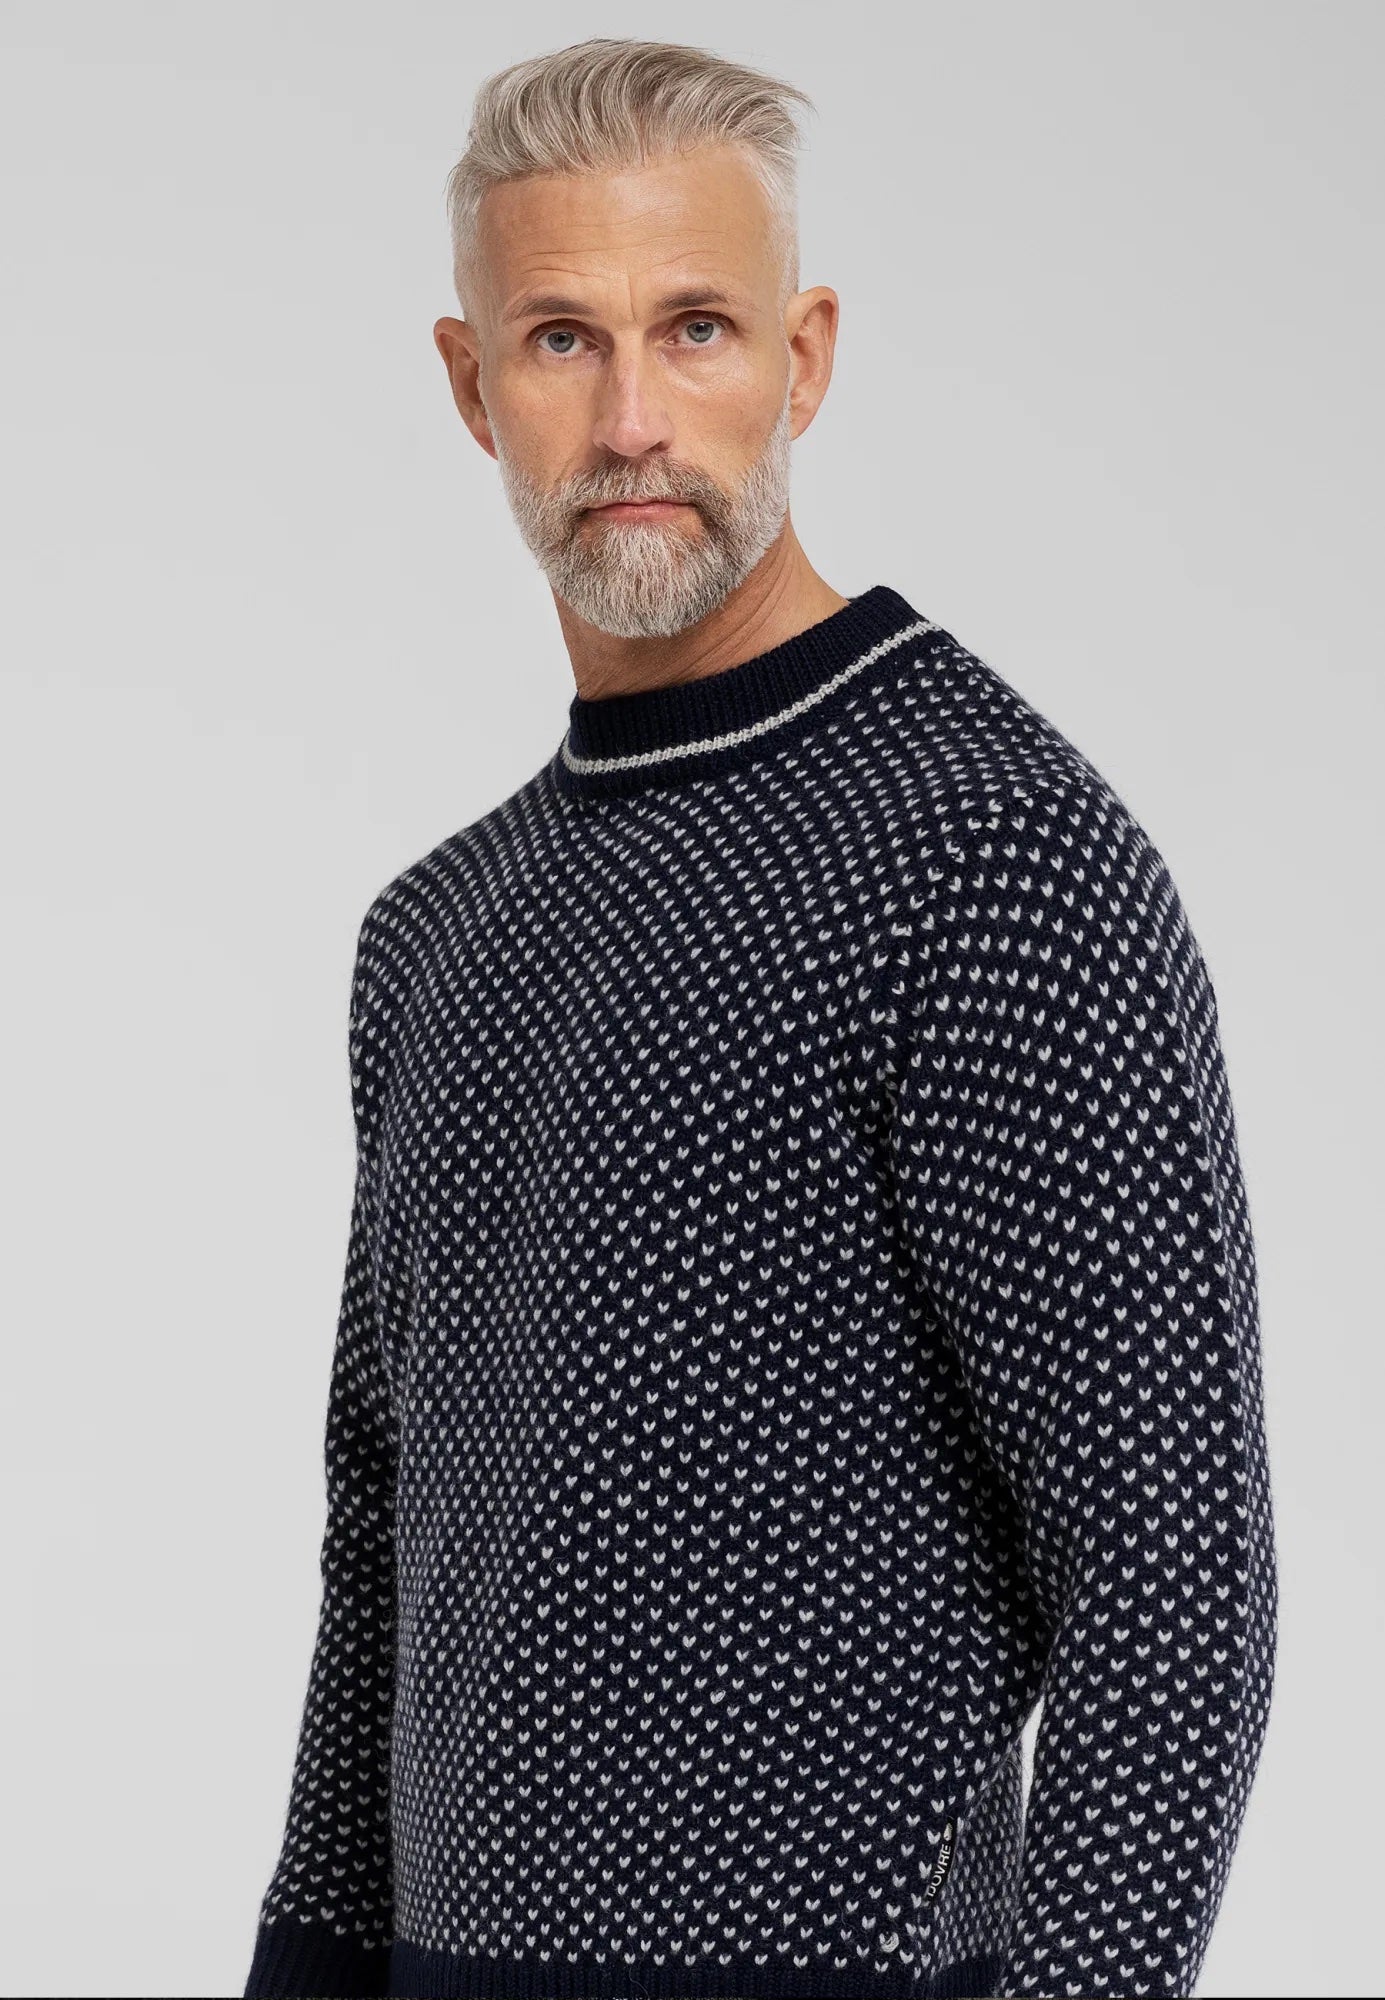 Knitted Pullover R-neck